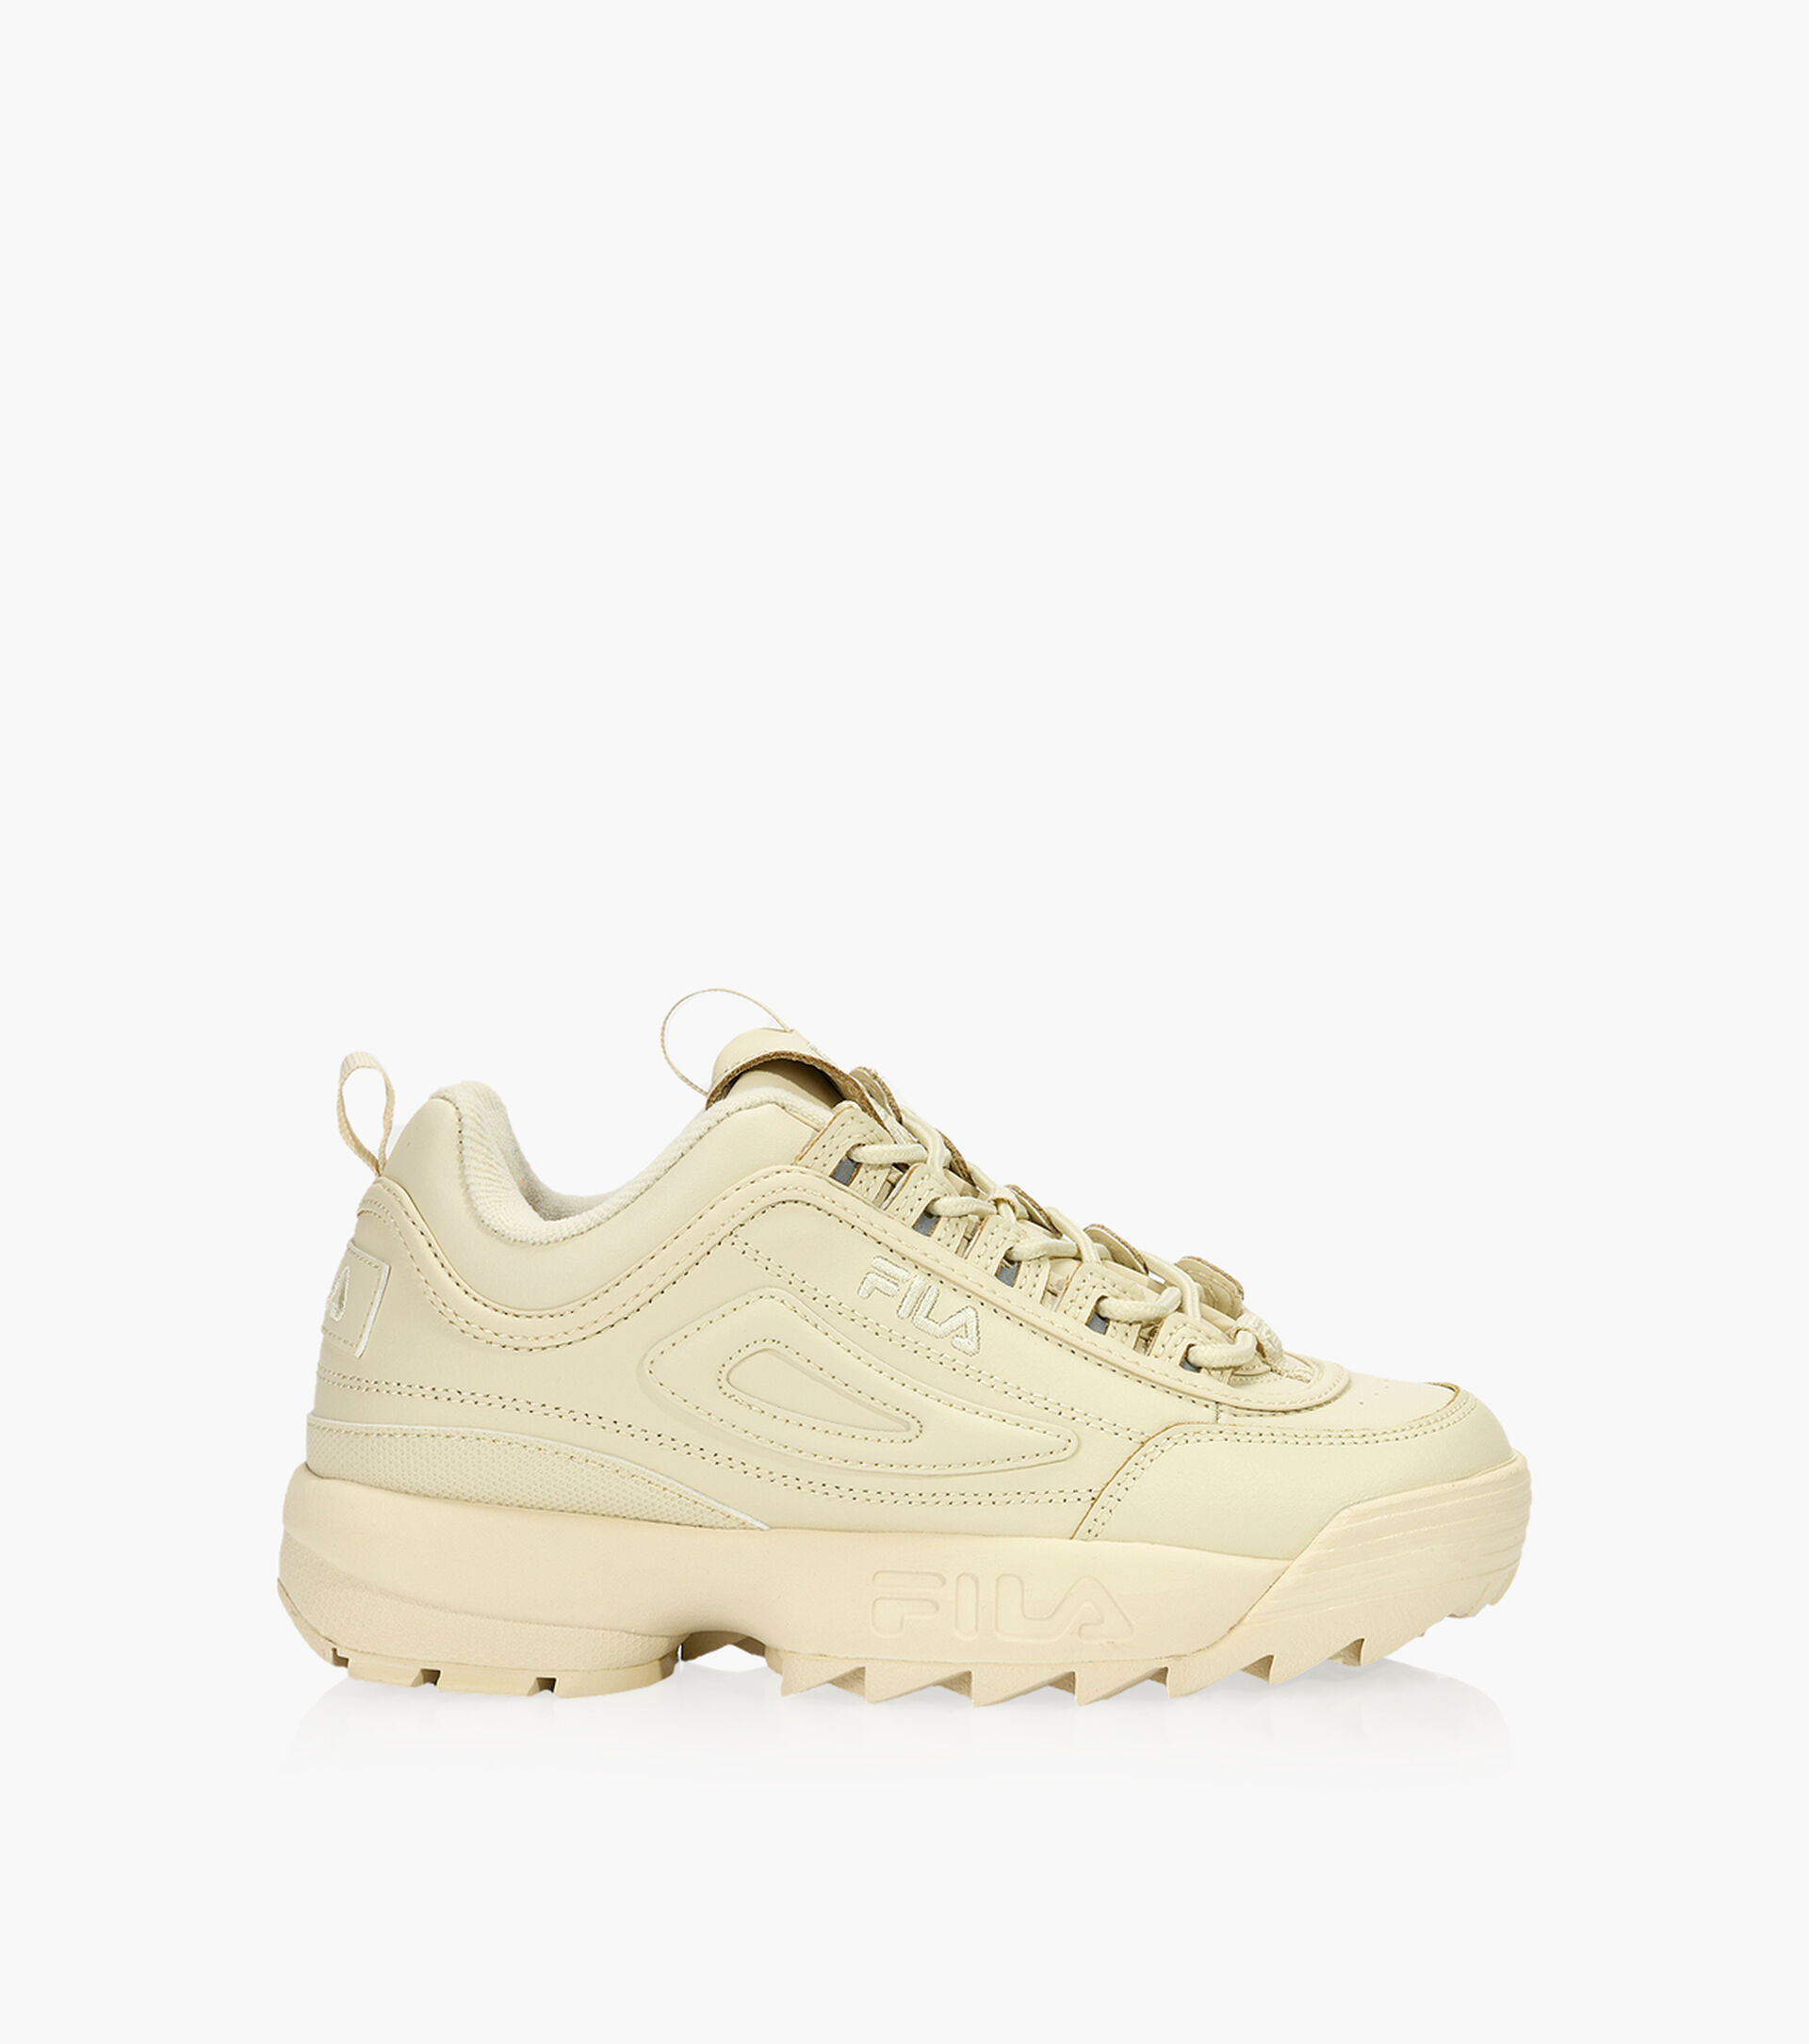 DISRUPTOR 2 PREMIUM Beige Synthetic | Browns Shoes